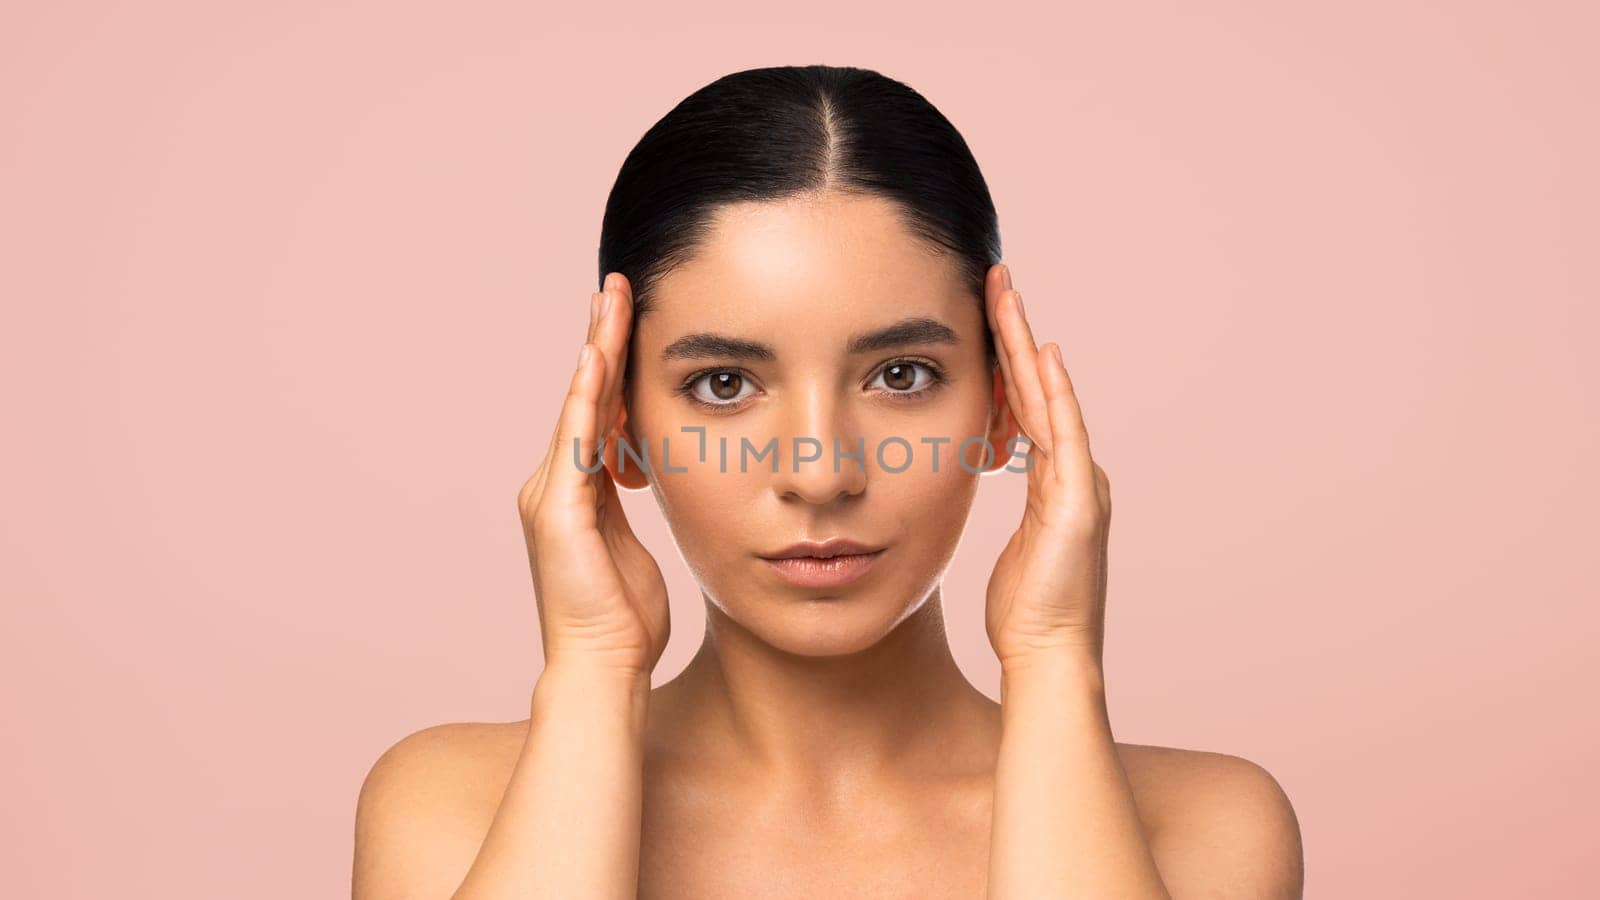 Beauty perfection. Attractive serious woman 25s with perfect skin and symmetrical face holding her hands next to head full face portrait.